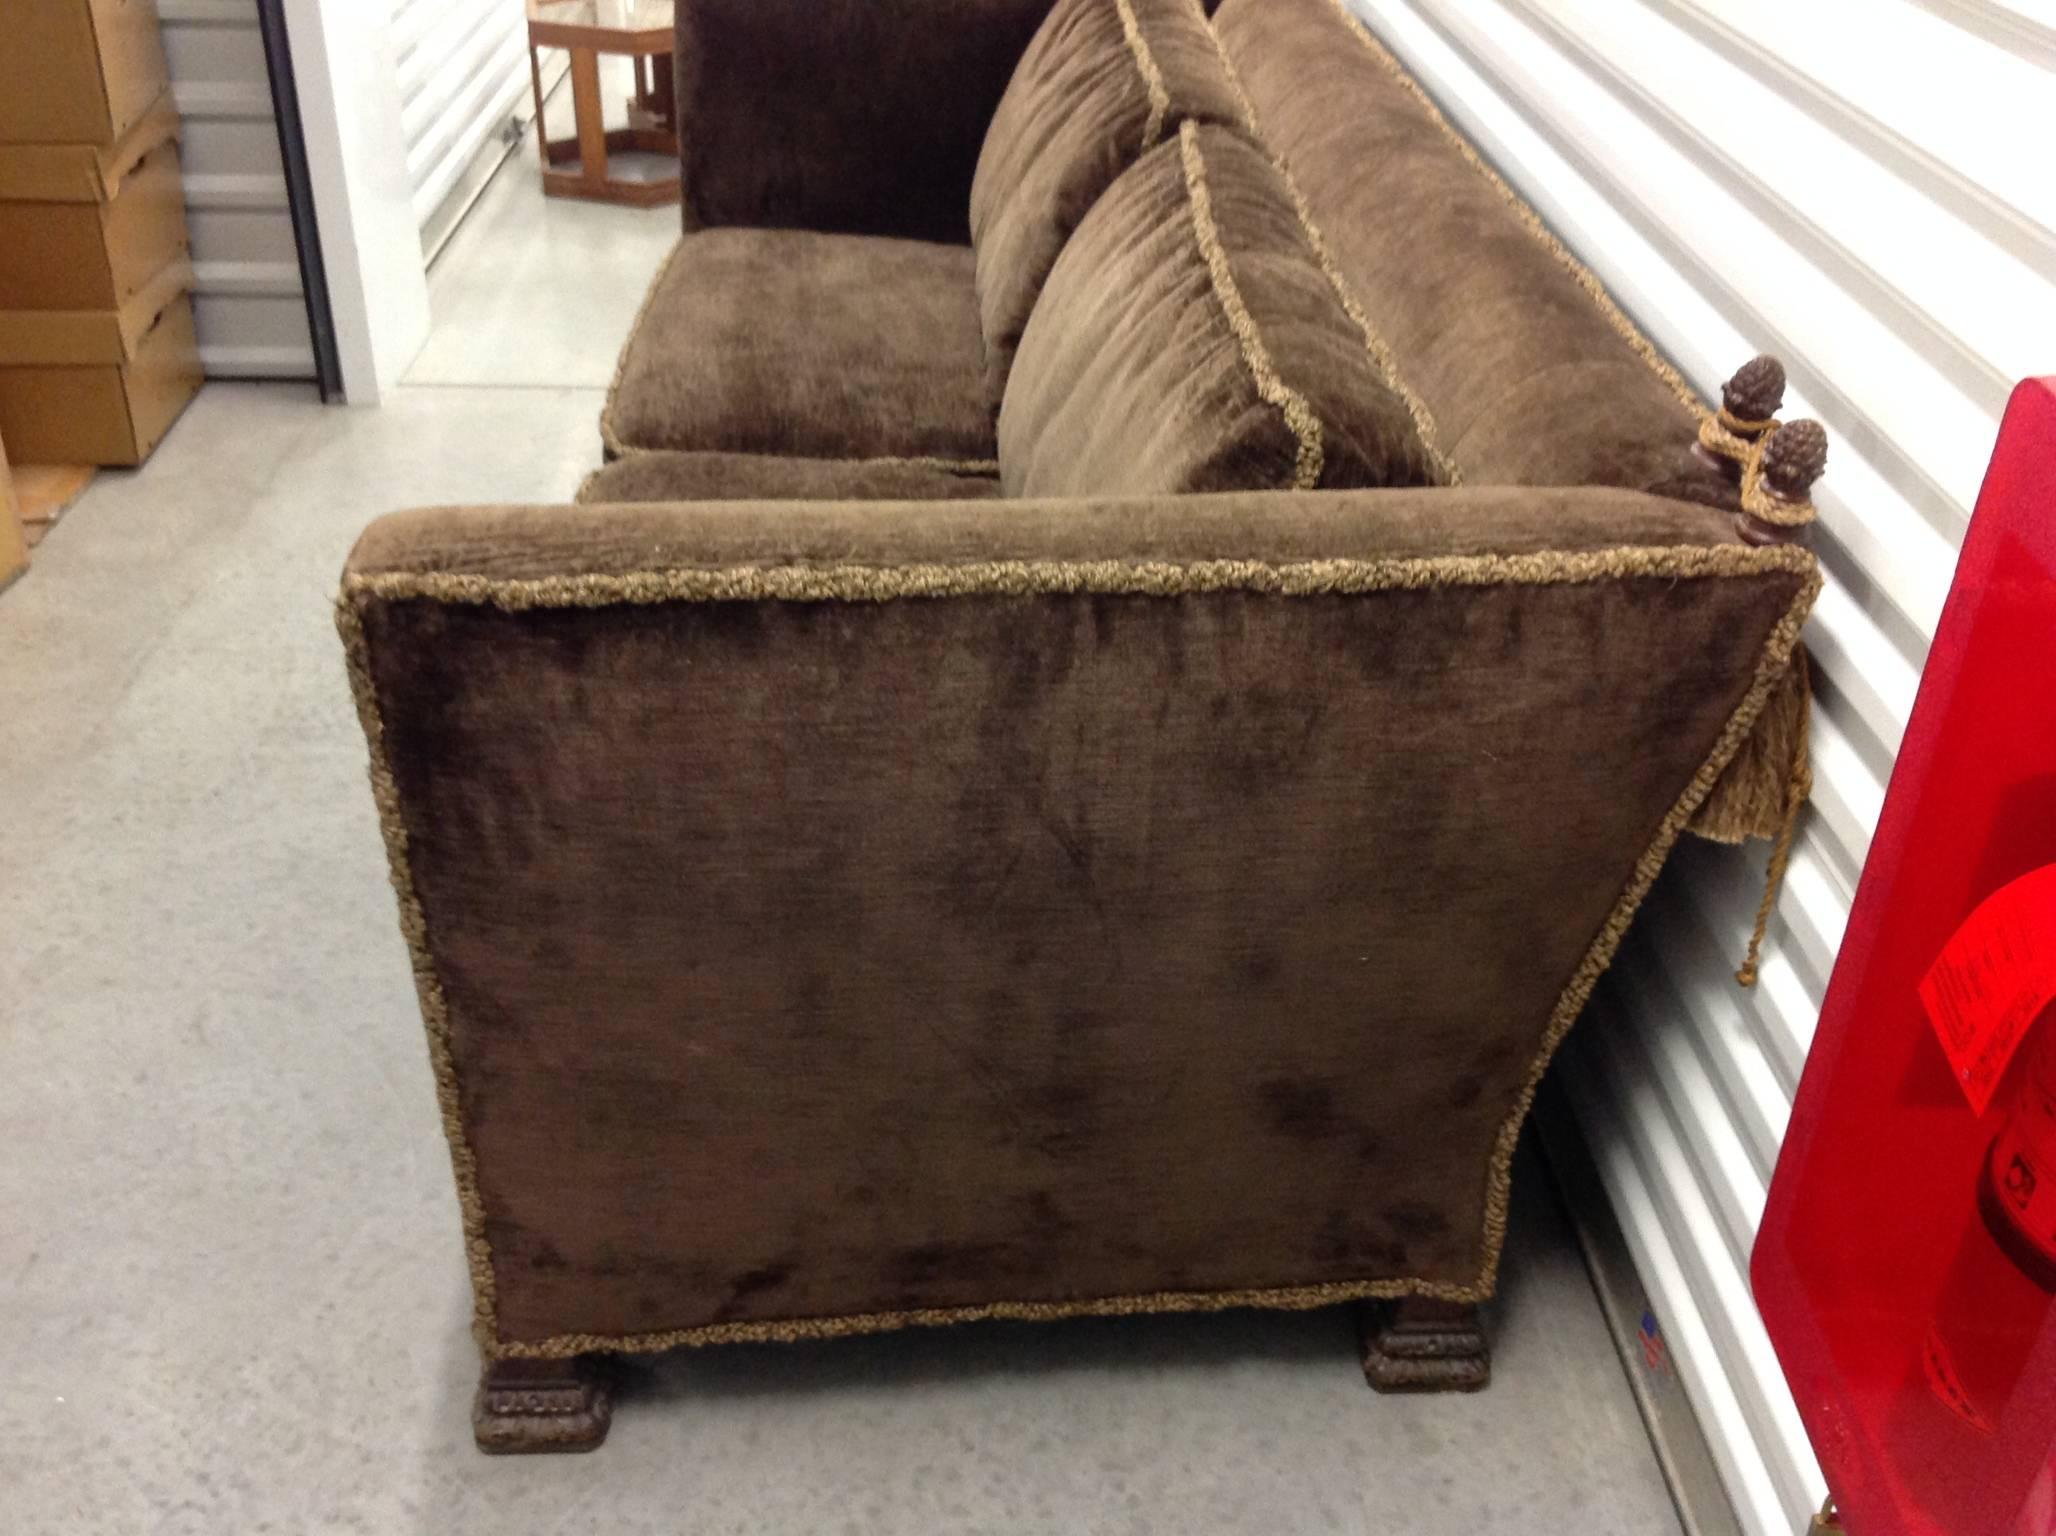 This 1930s-1940s Knole sofa with carved finials with tassels and intricately carved feet features drop sides in original brown velvet upholstery with fringe surrounding the sofa and pillows. This unsual Knole sofa is comfortable and in excellent